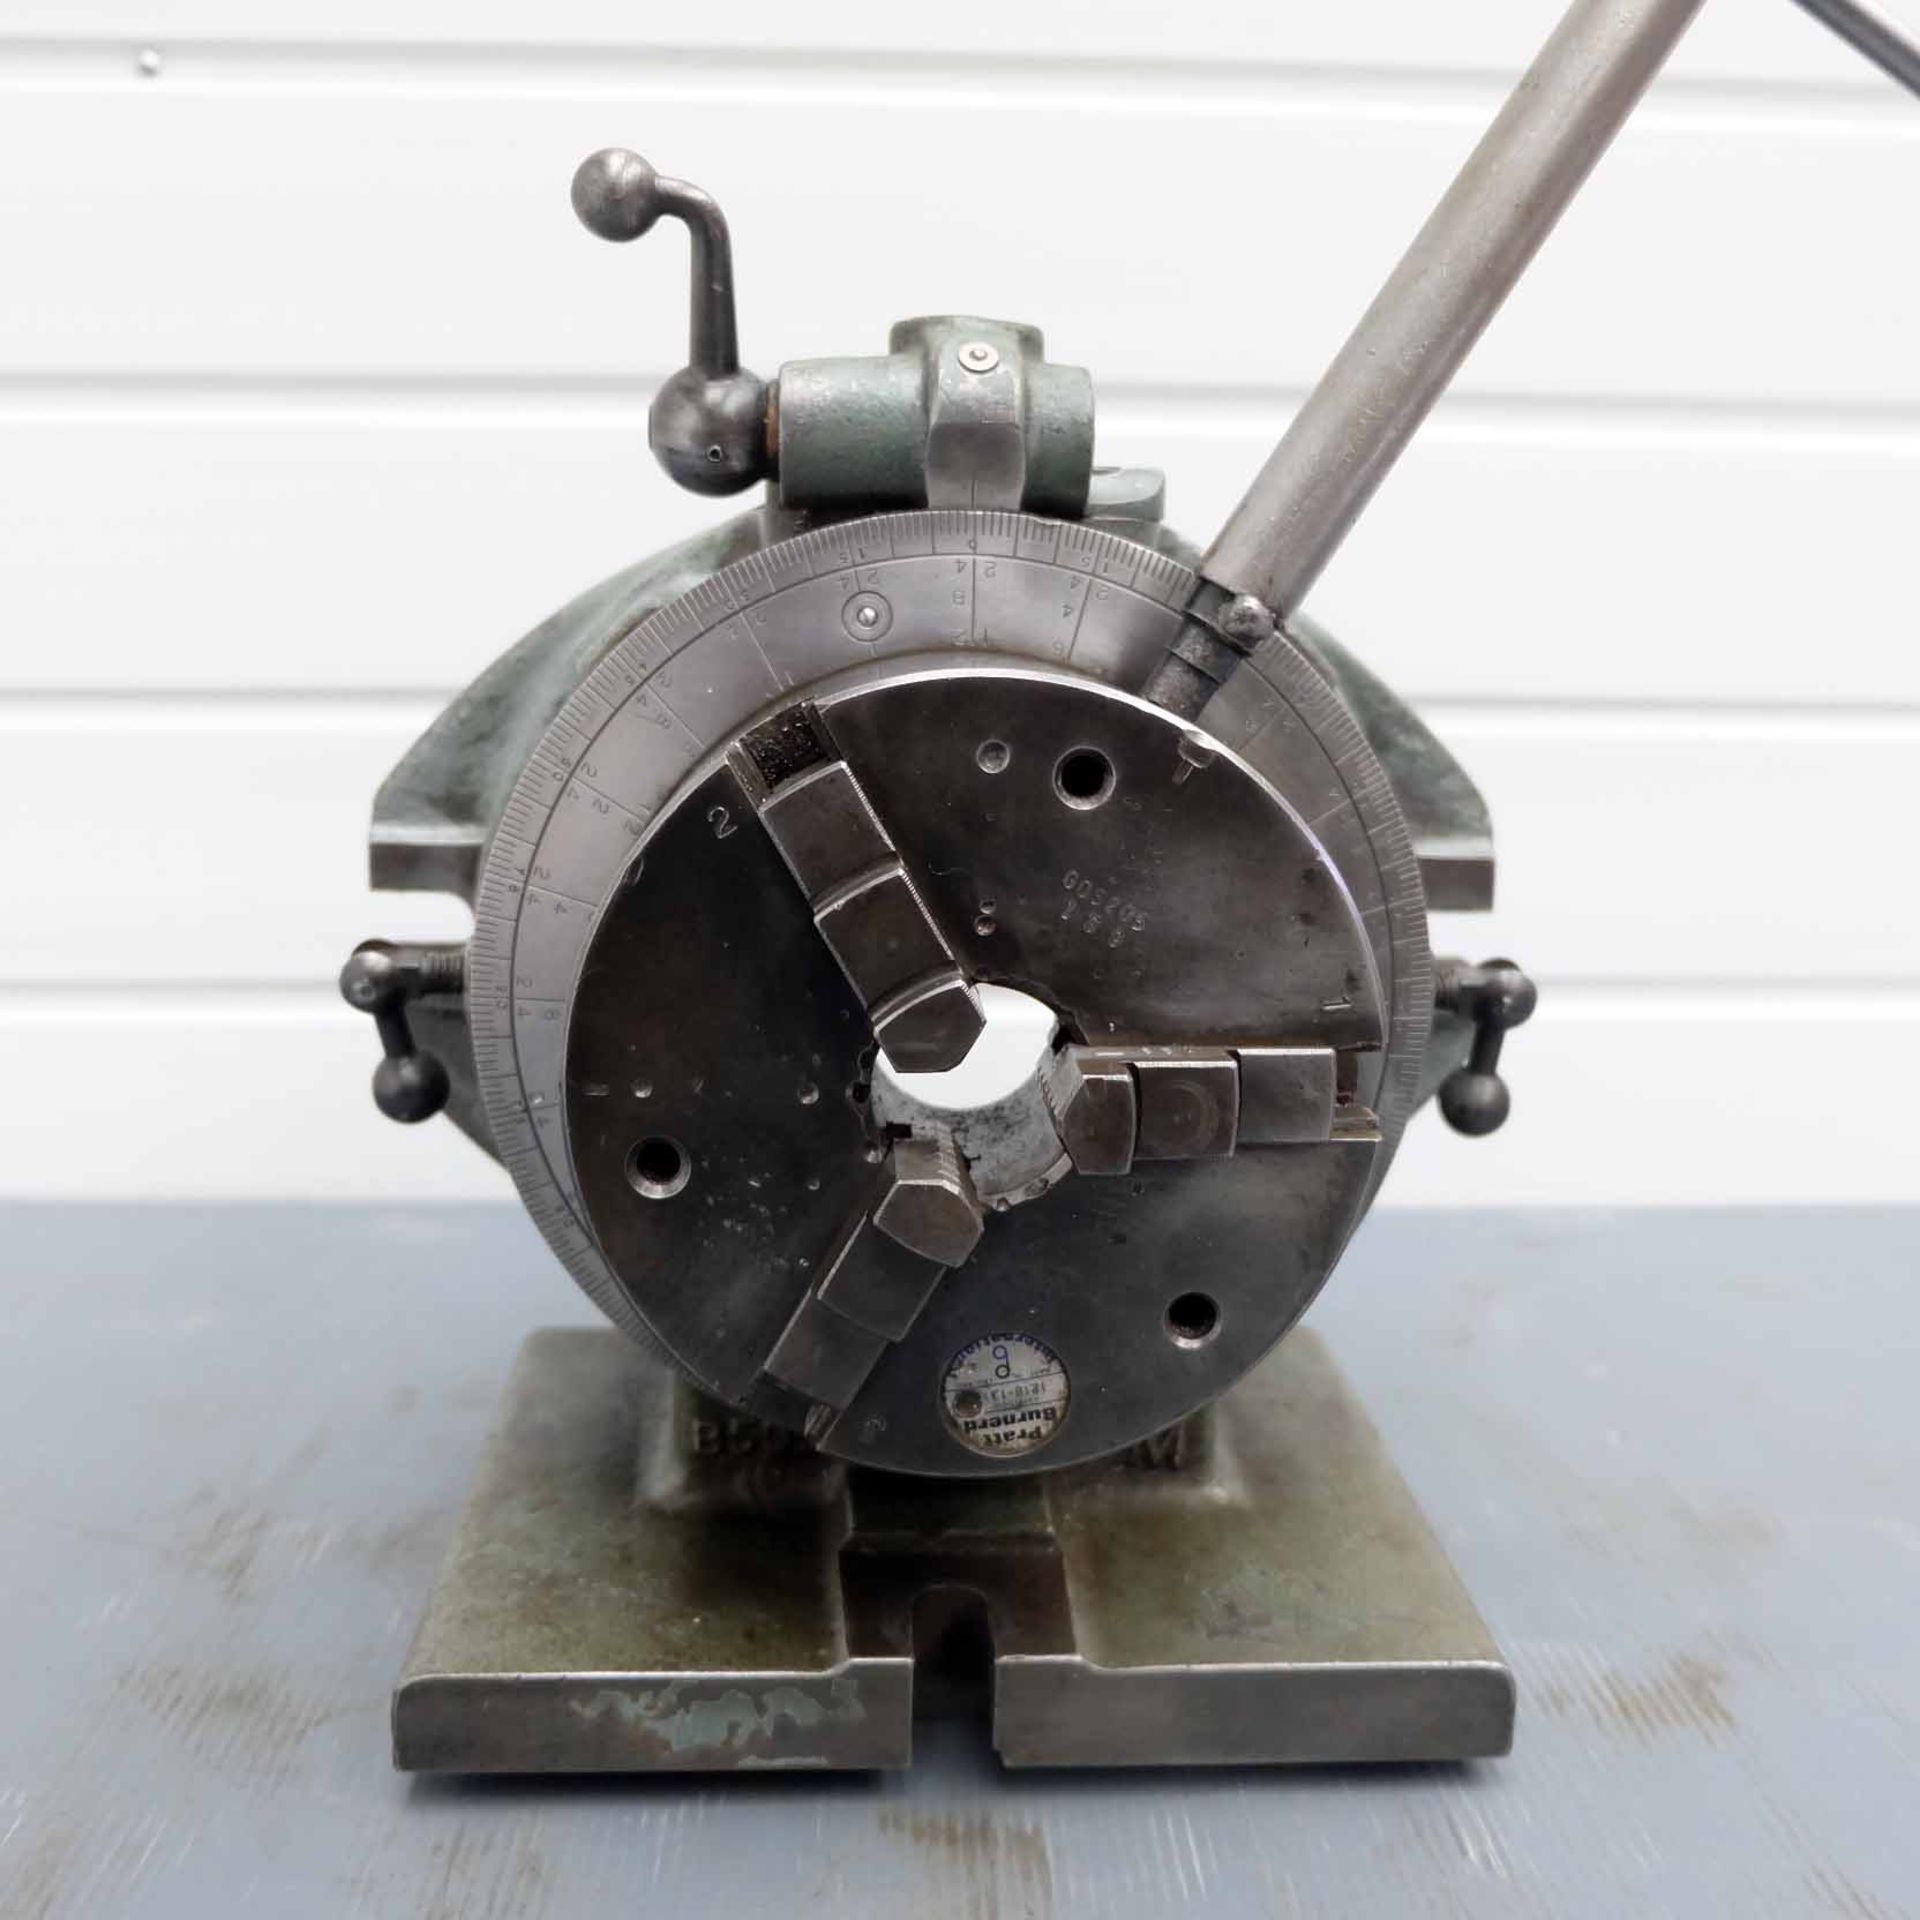 Marlco Horizontal / Vertical Indexing Head. With 5 1/4" 3 Jaw Chuck. - Image 4 of 7